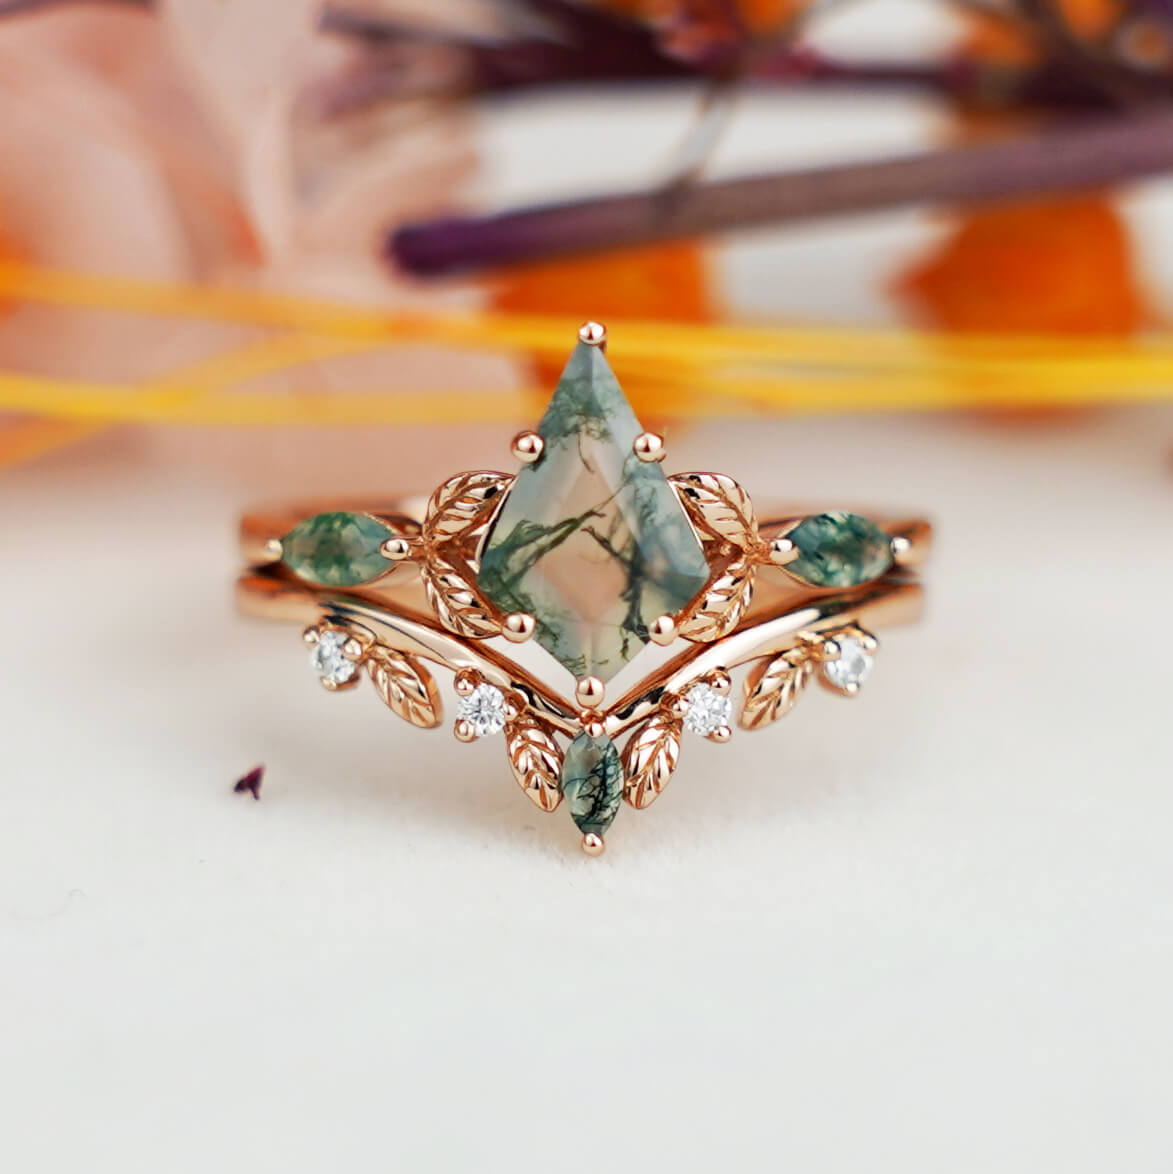 Leaf-Inspired Kite Cut Moss Agate Engagement Ring Set – A Unique, Natural and Handcrafted 14k Gold Treasure, Ideal Gift for Her